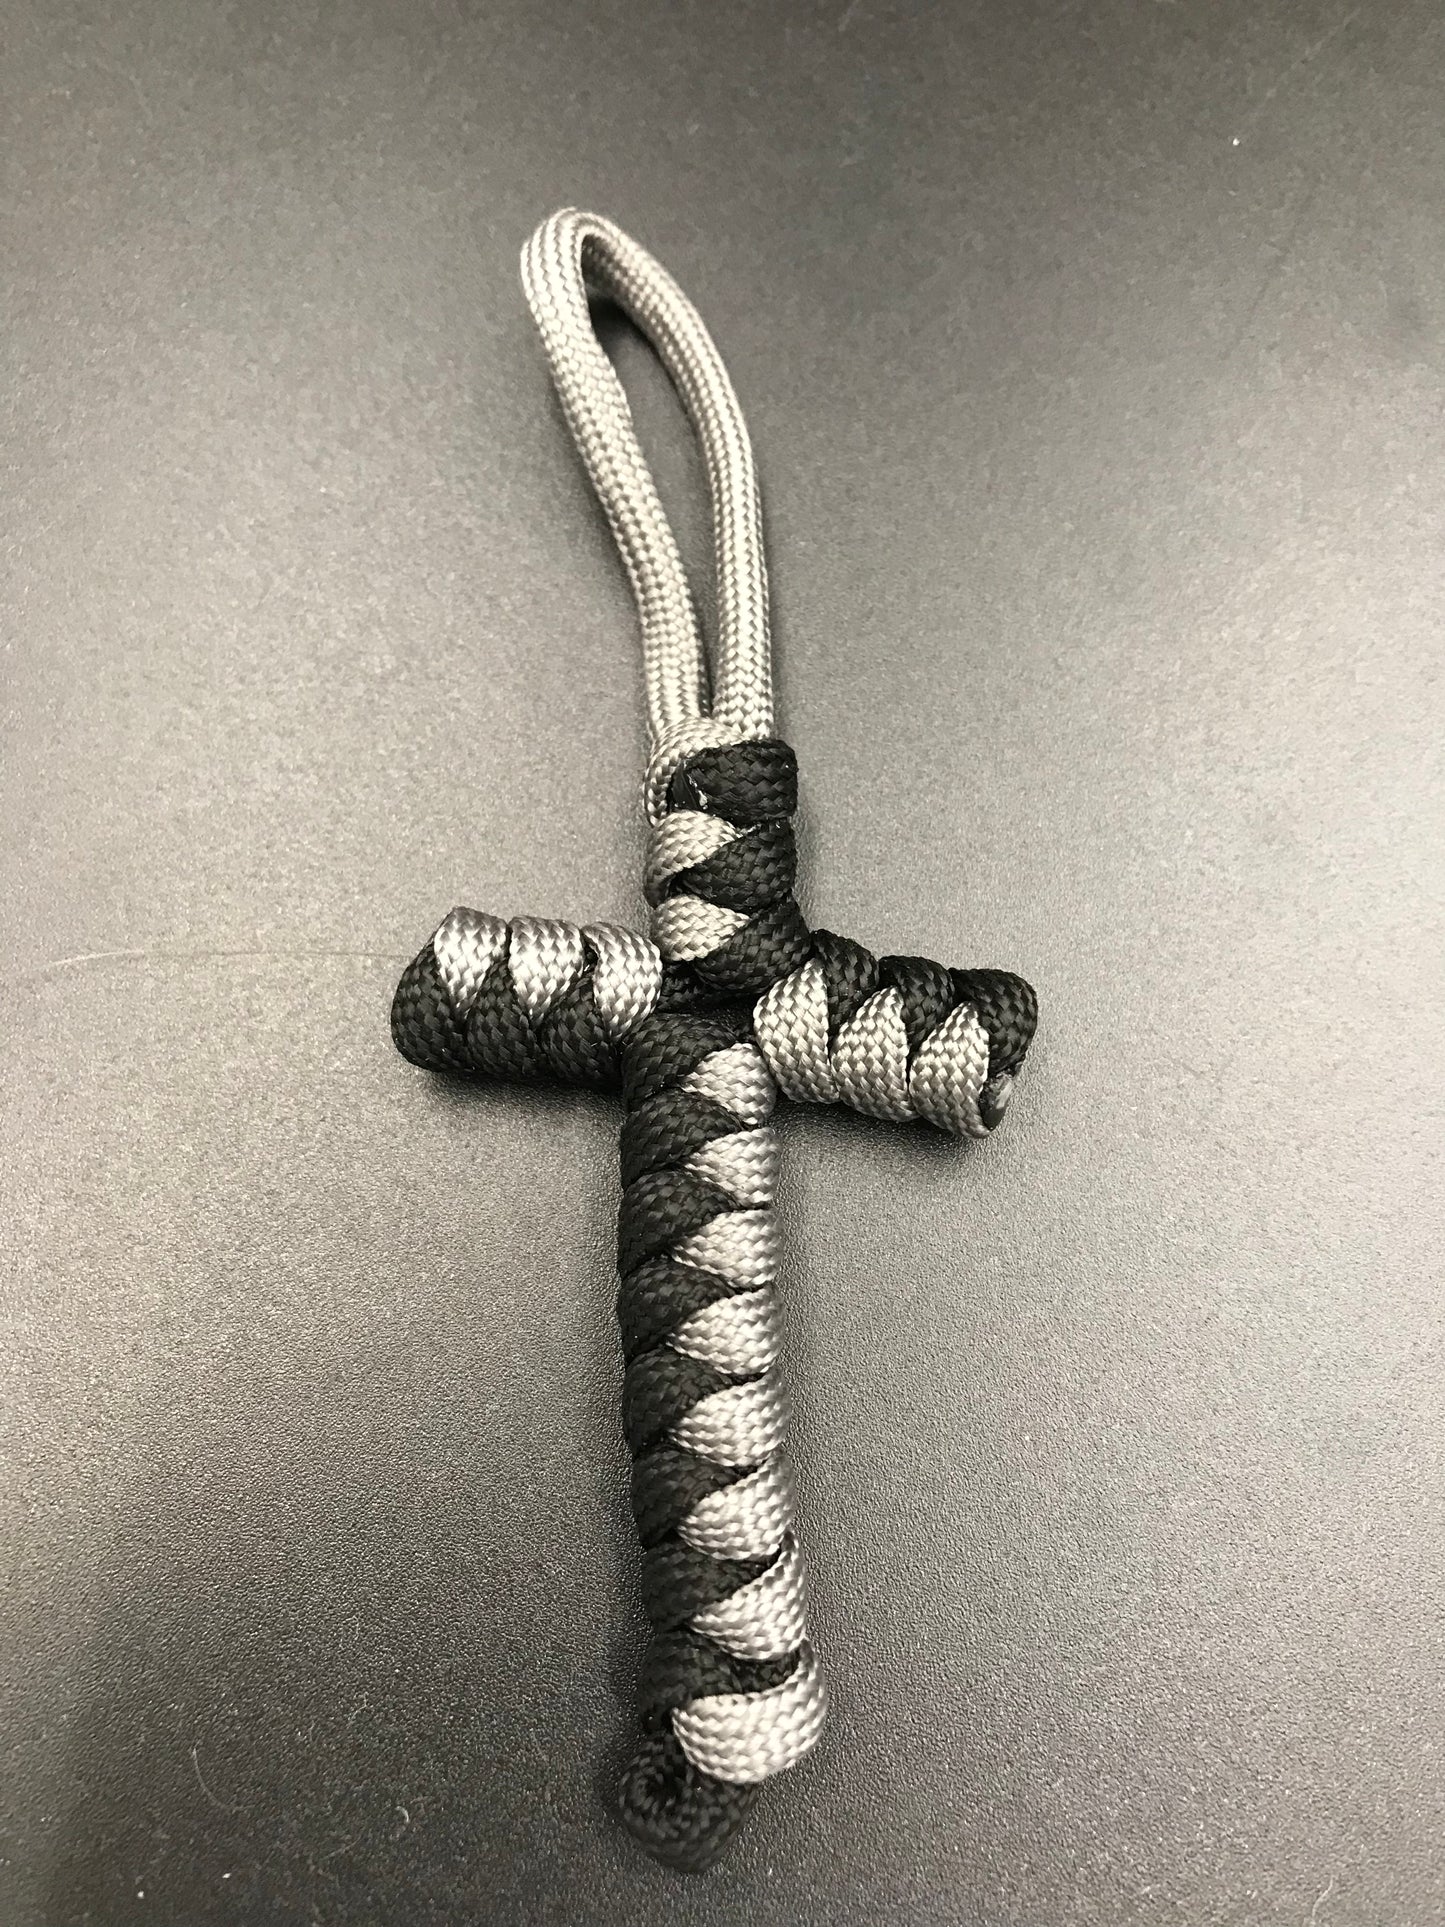 Handmade Paracord cross crucifix pendant in Grey and black